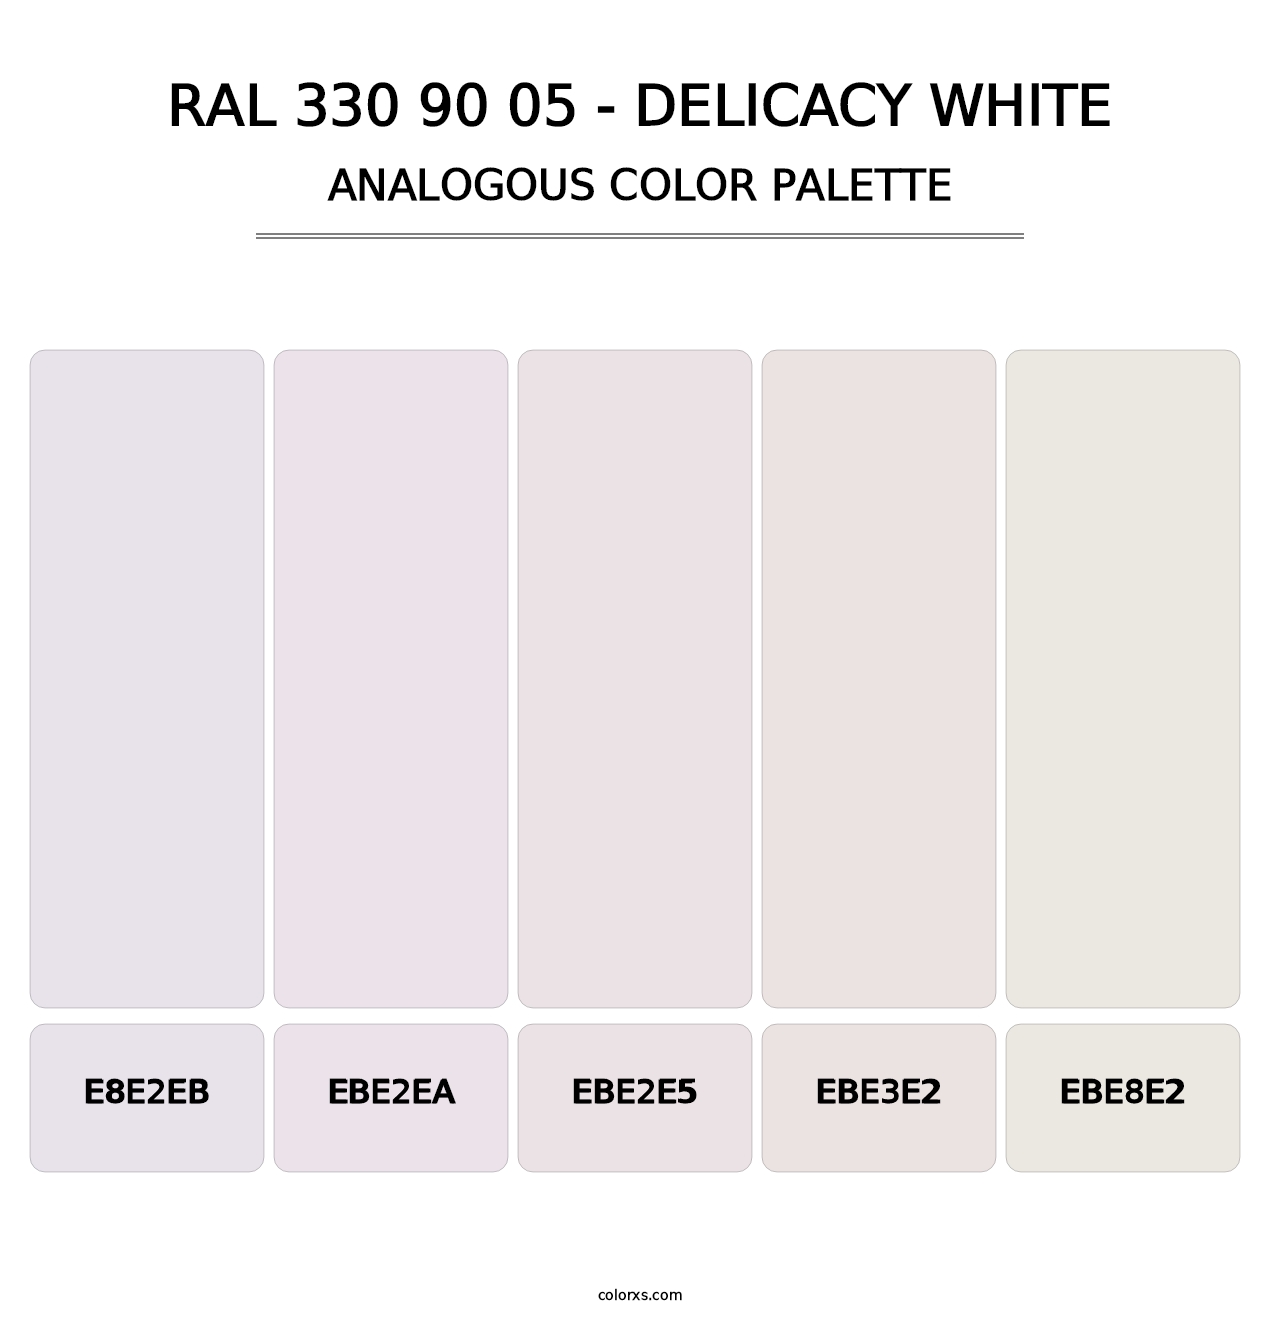 RAL 330 90 05 - Delicacy White - Analogous Color Palette